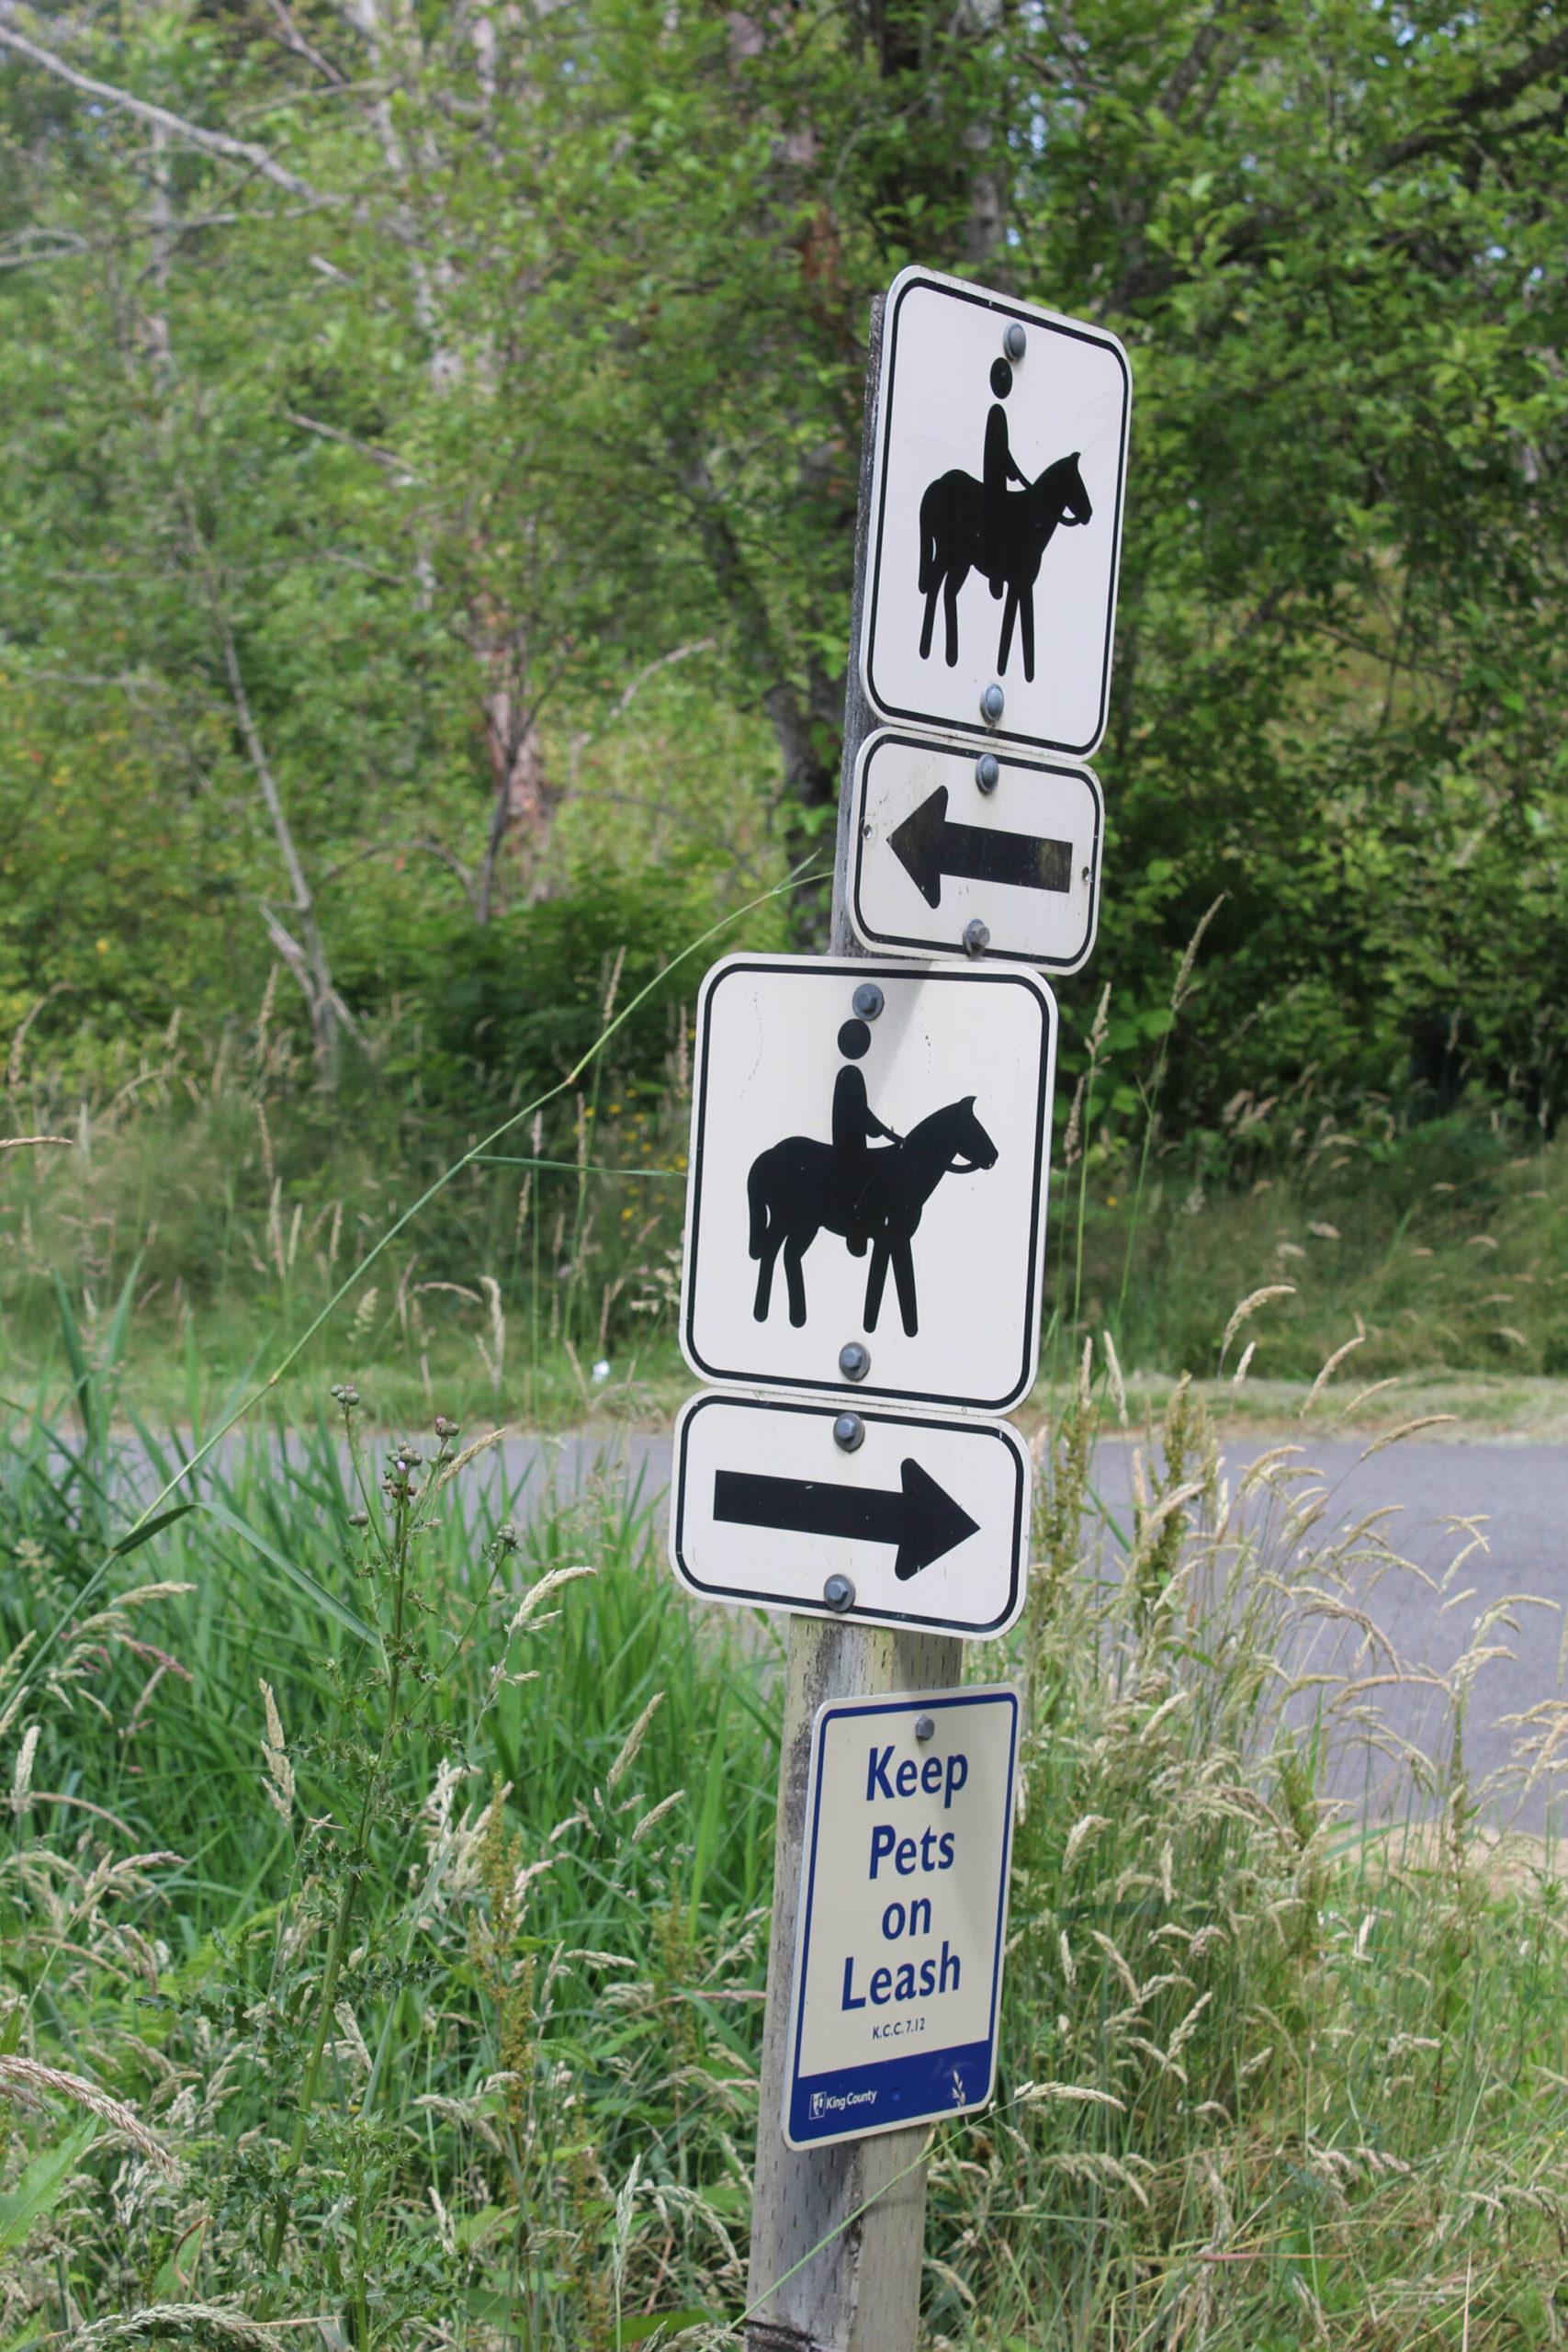 Equestrians who use the Soos Creek Trail for trail riding hope to have a parking lot for trailers in the new community park. Photo by Bailey Jo Josie/Sound Publishing.